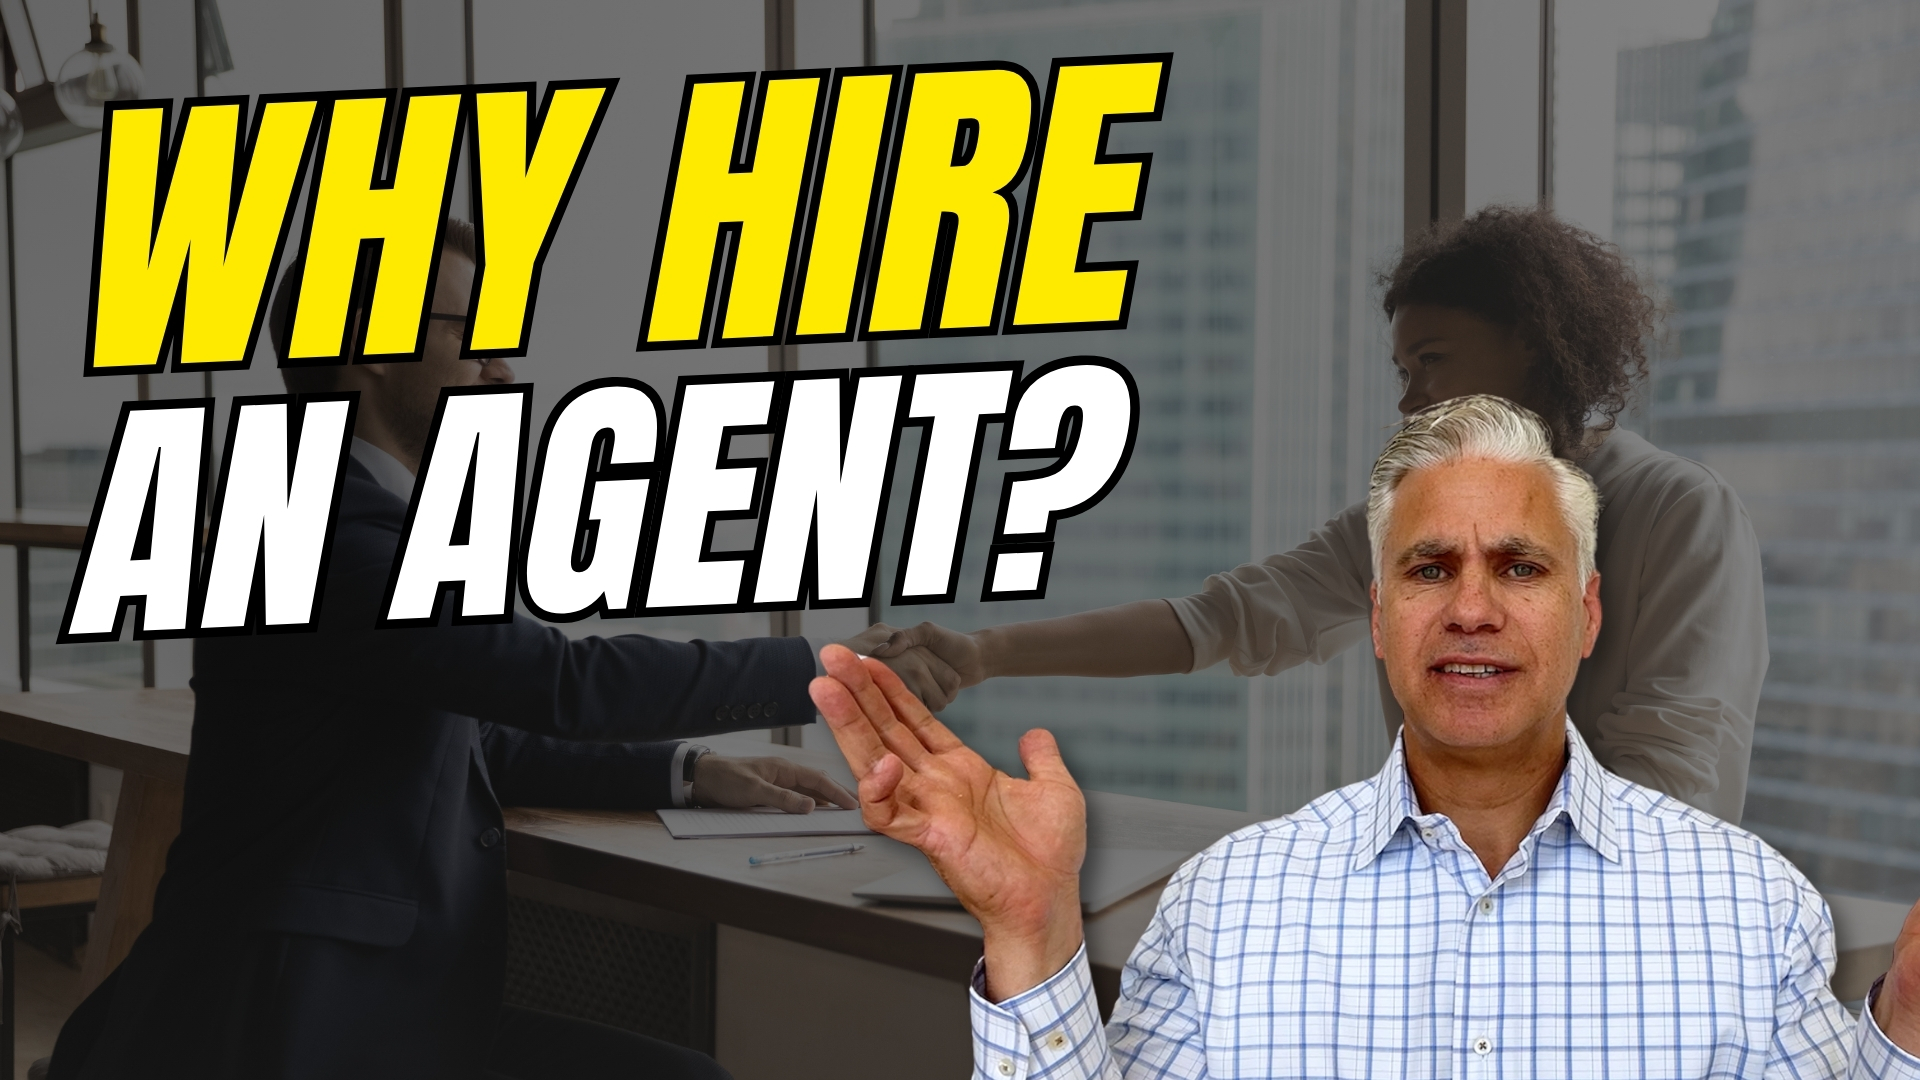 Why You Should Hire a Buyer’s Agent